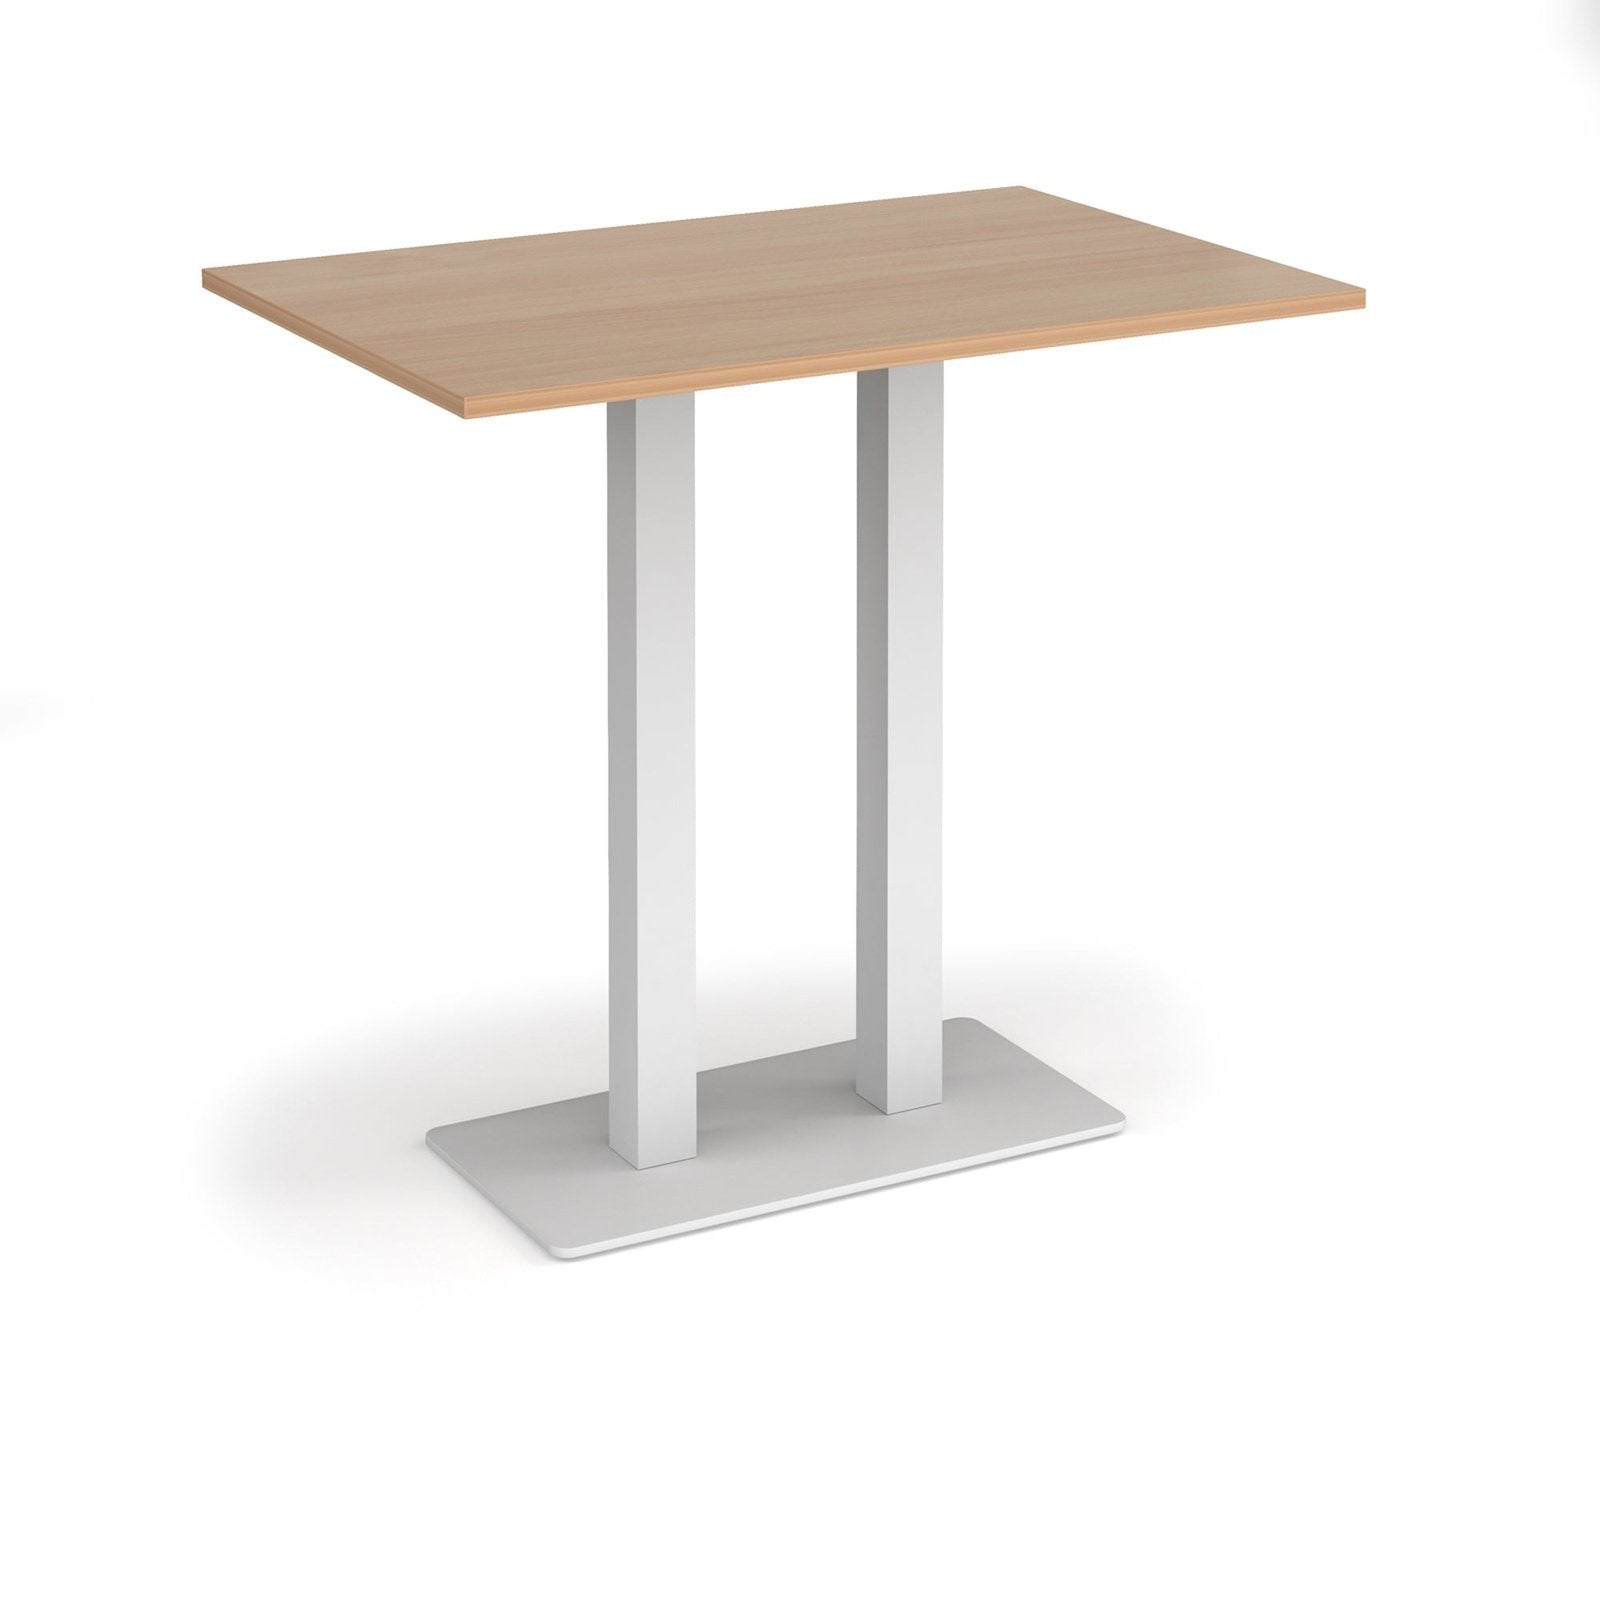 Eros rectangular poseur table - Office Products Online